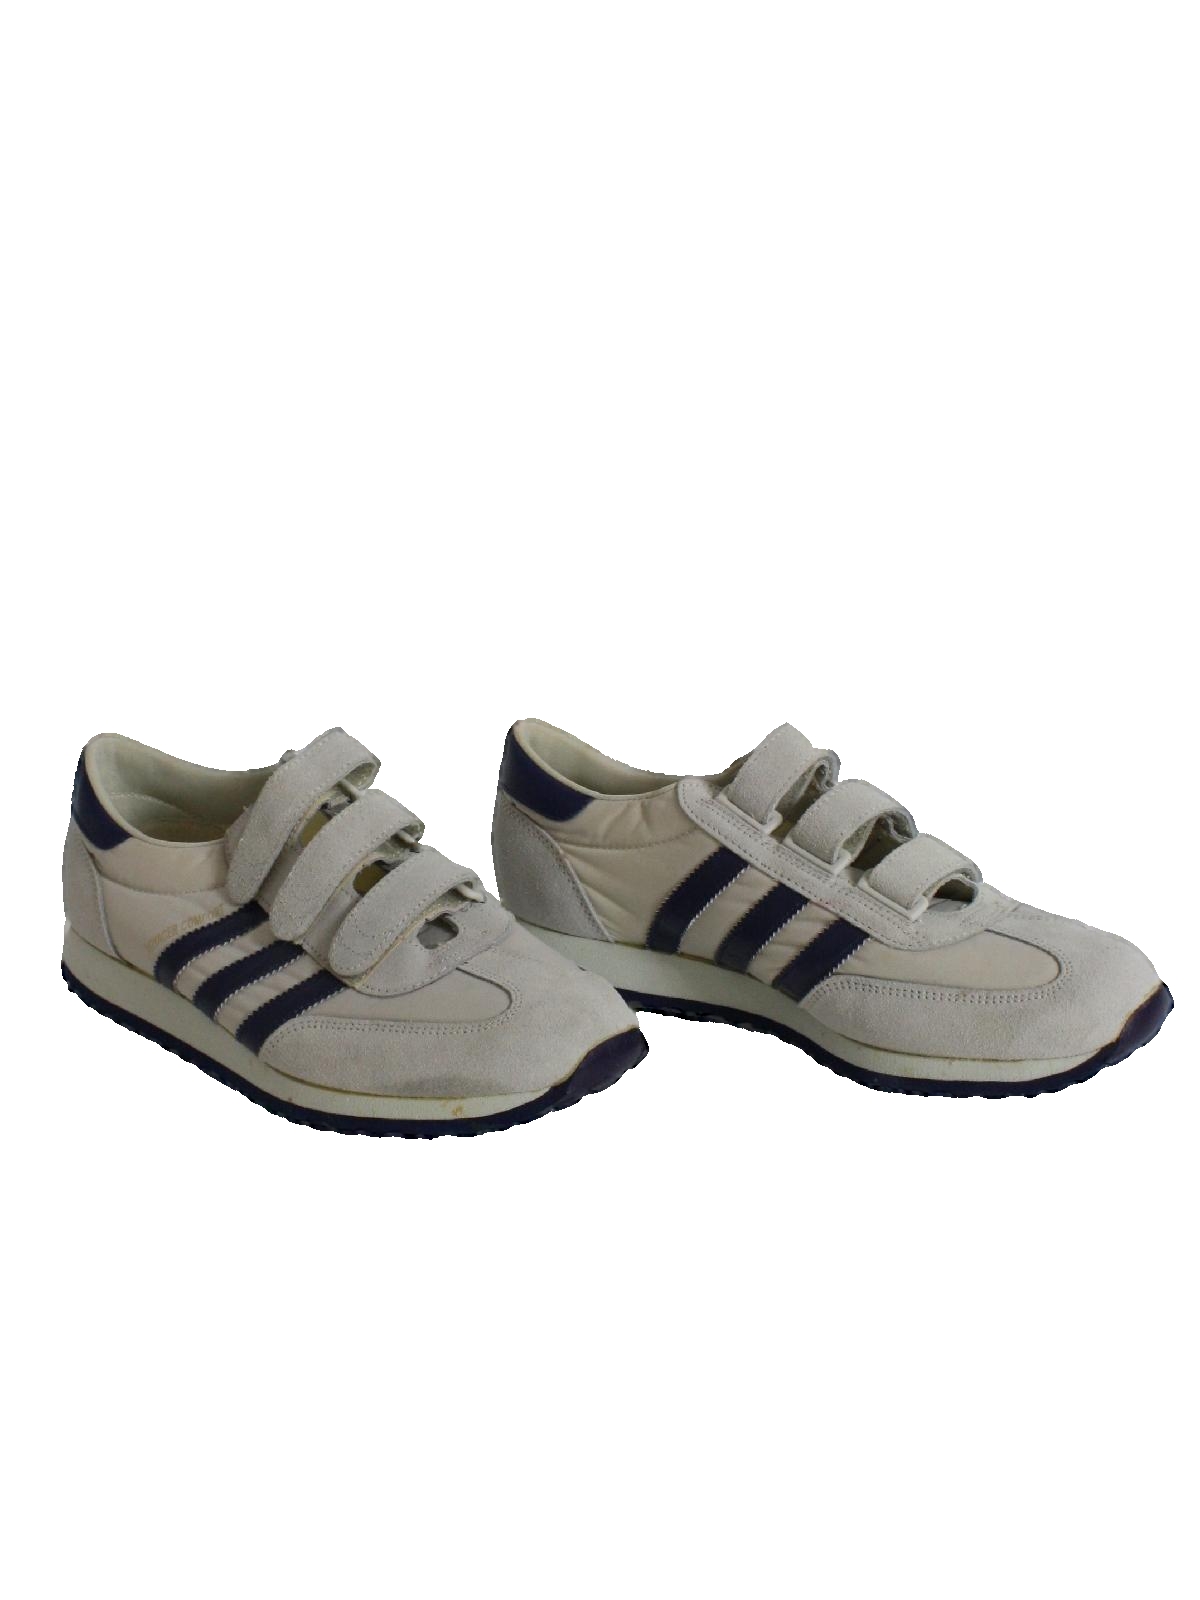 Adidas 80 S Shoes